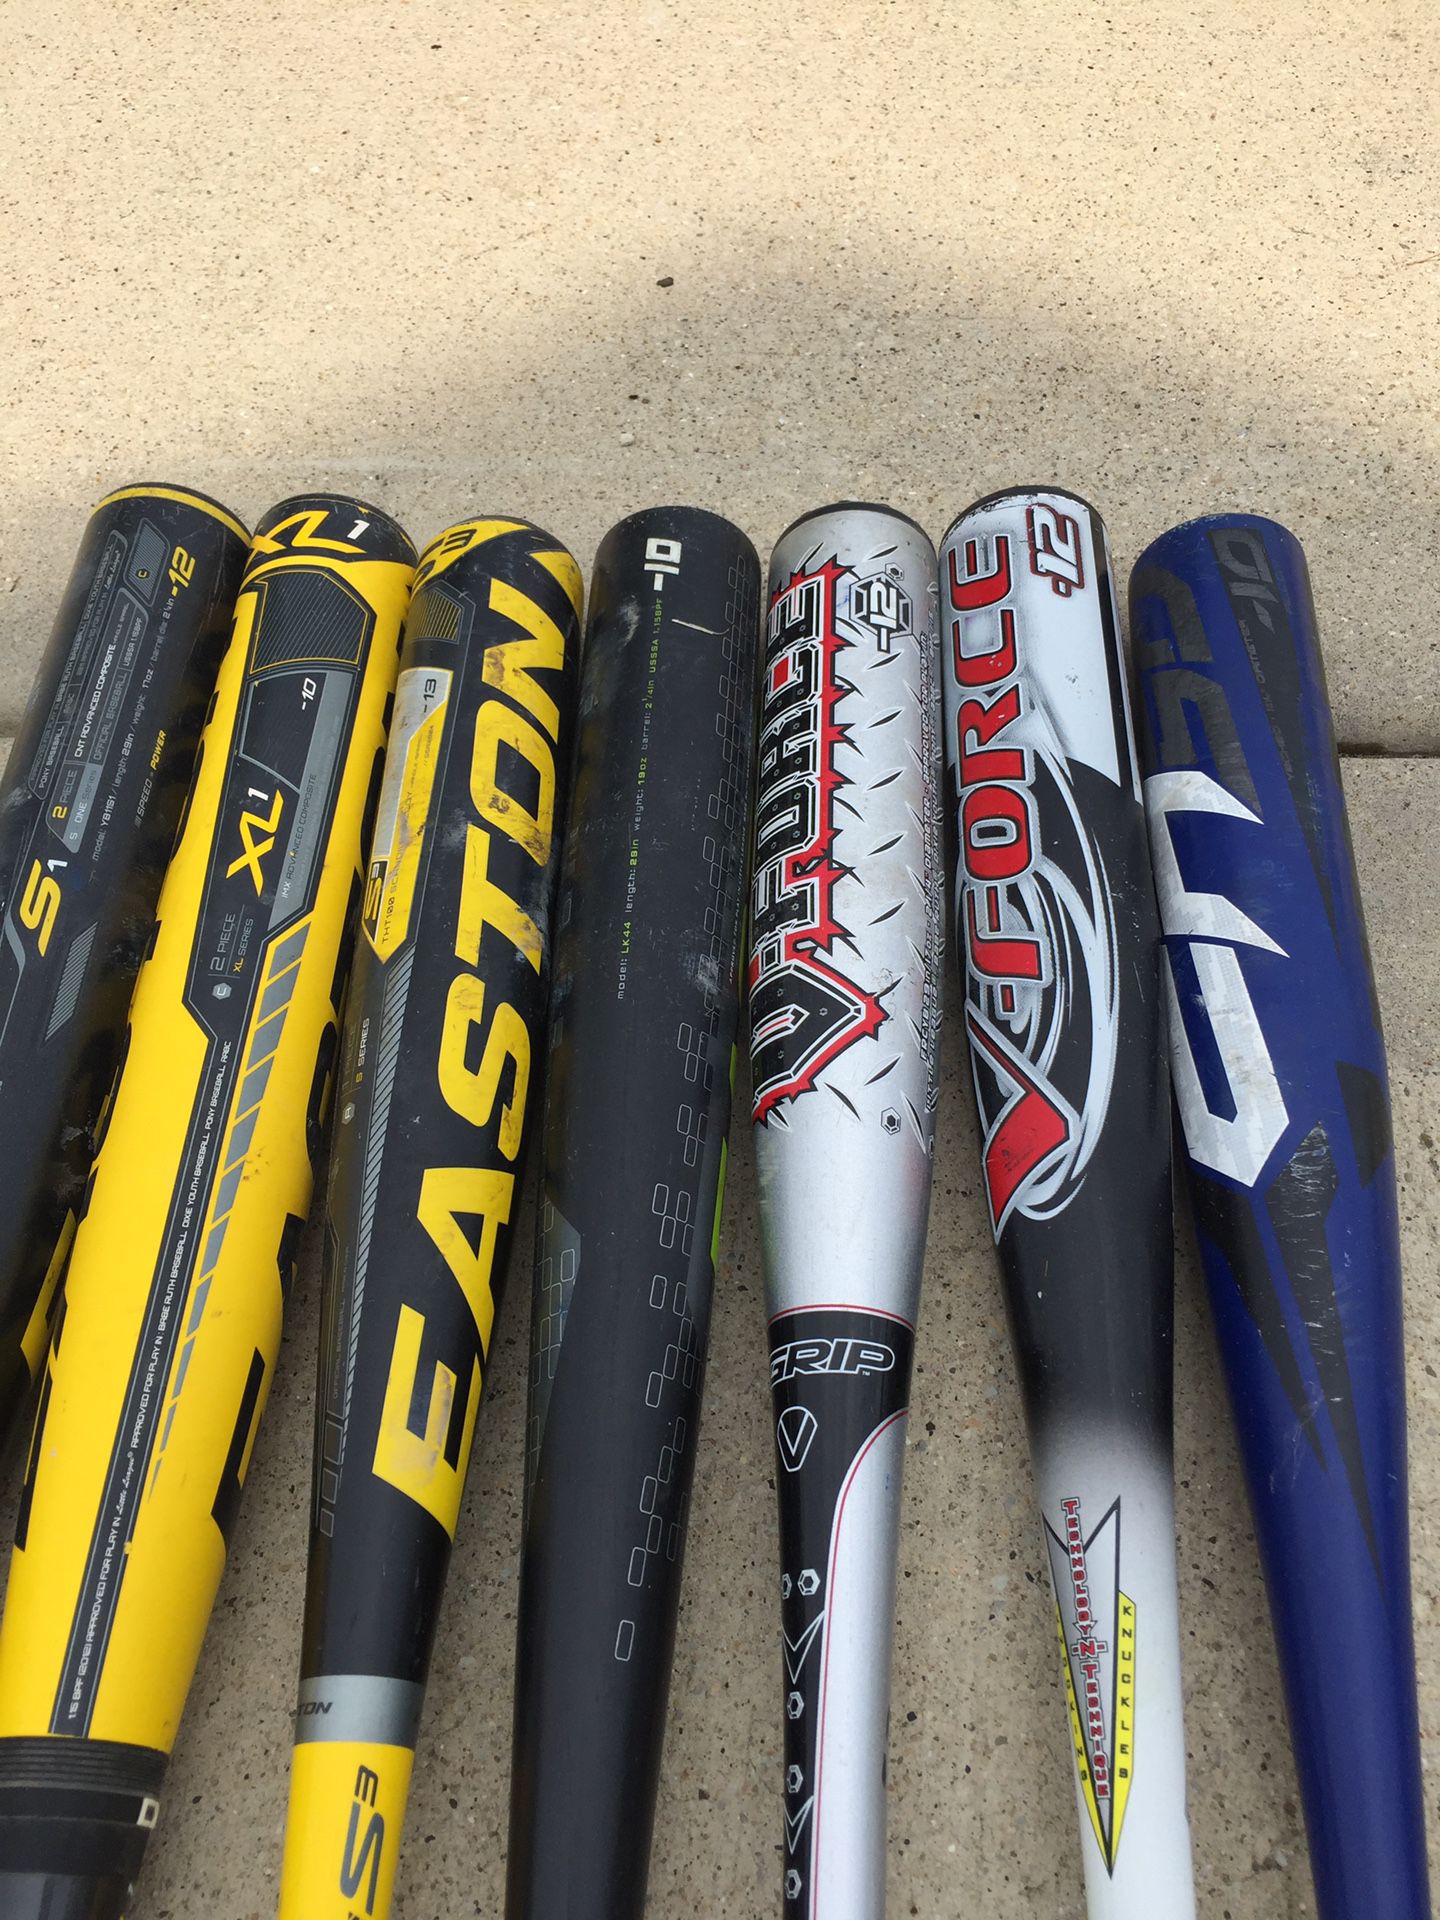 Various little league bats. Make offer. LK44 bat (black and green one in middle) no longer available.